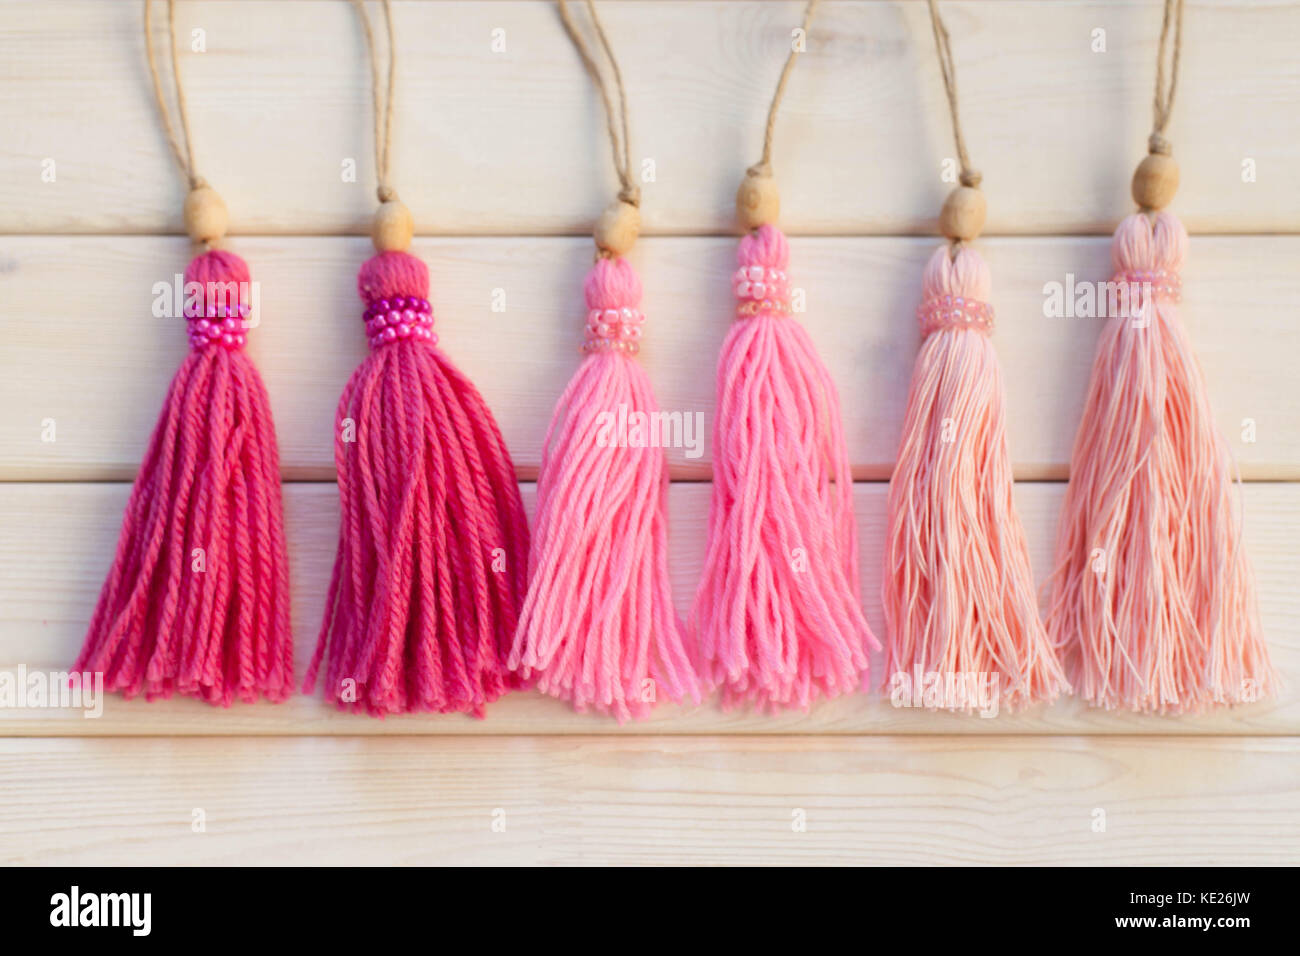 Pink tassels. Background of white wood. Stock Photo